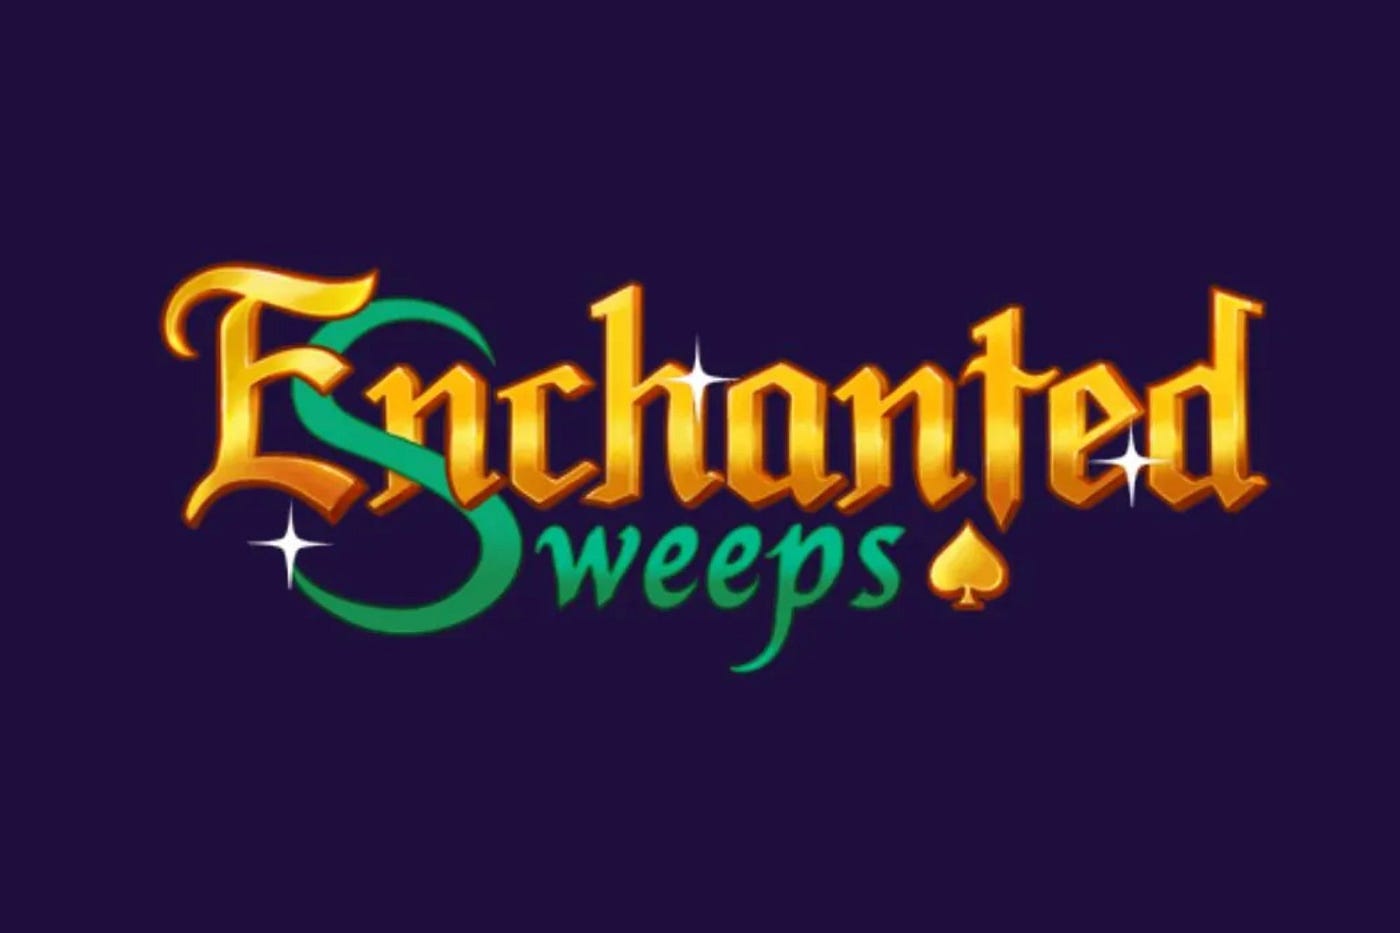 Enchanted Casino Review - Enchanted Sweeps